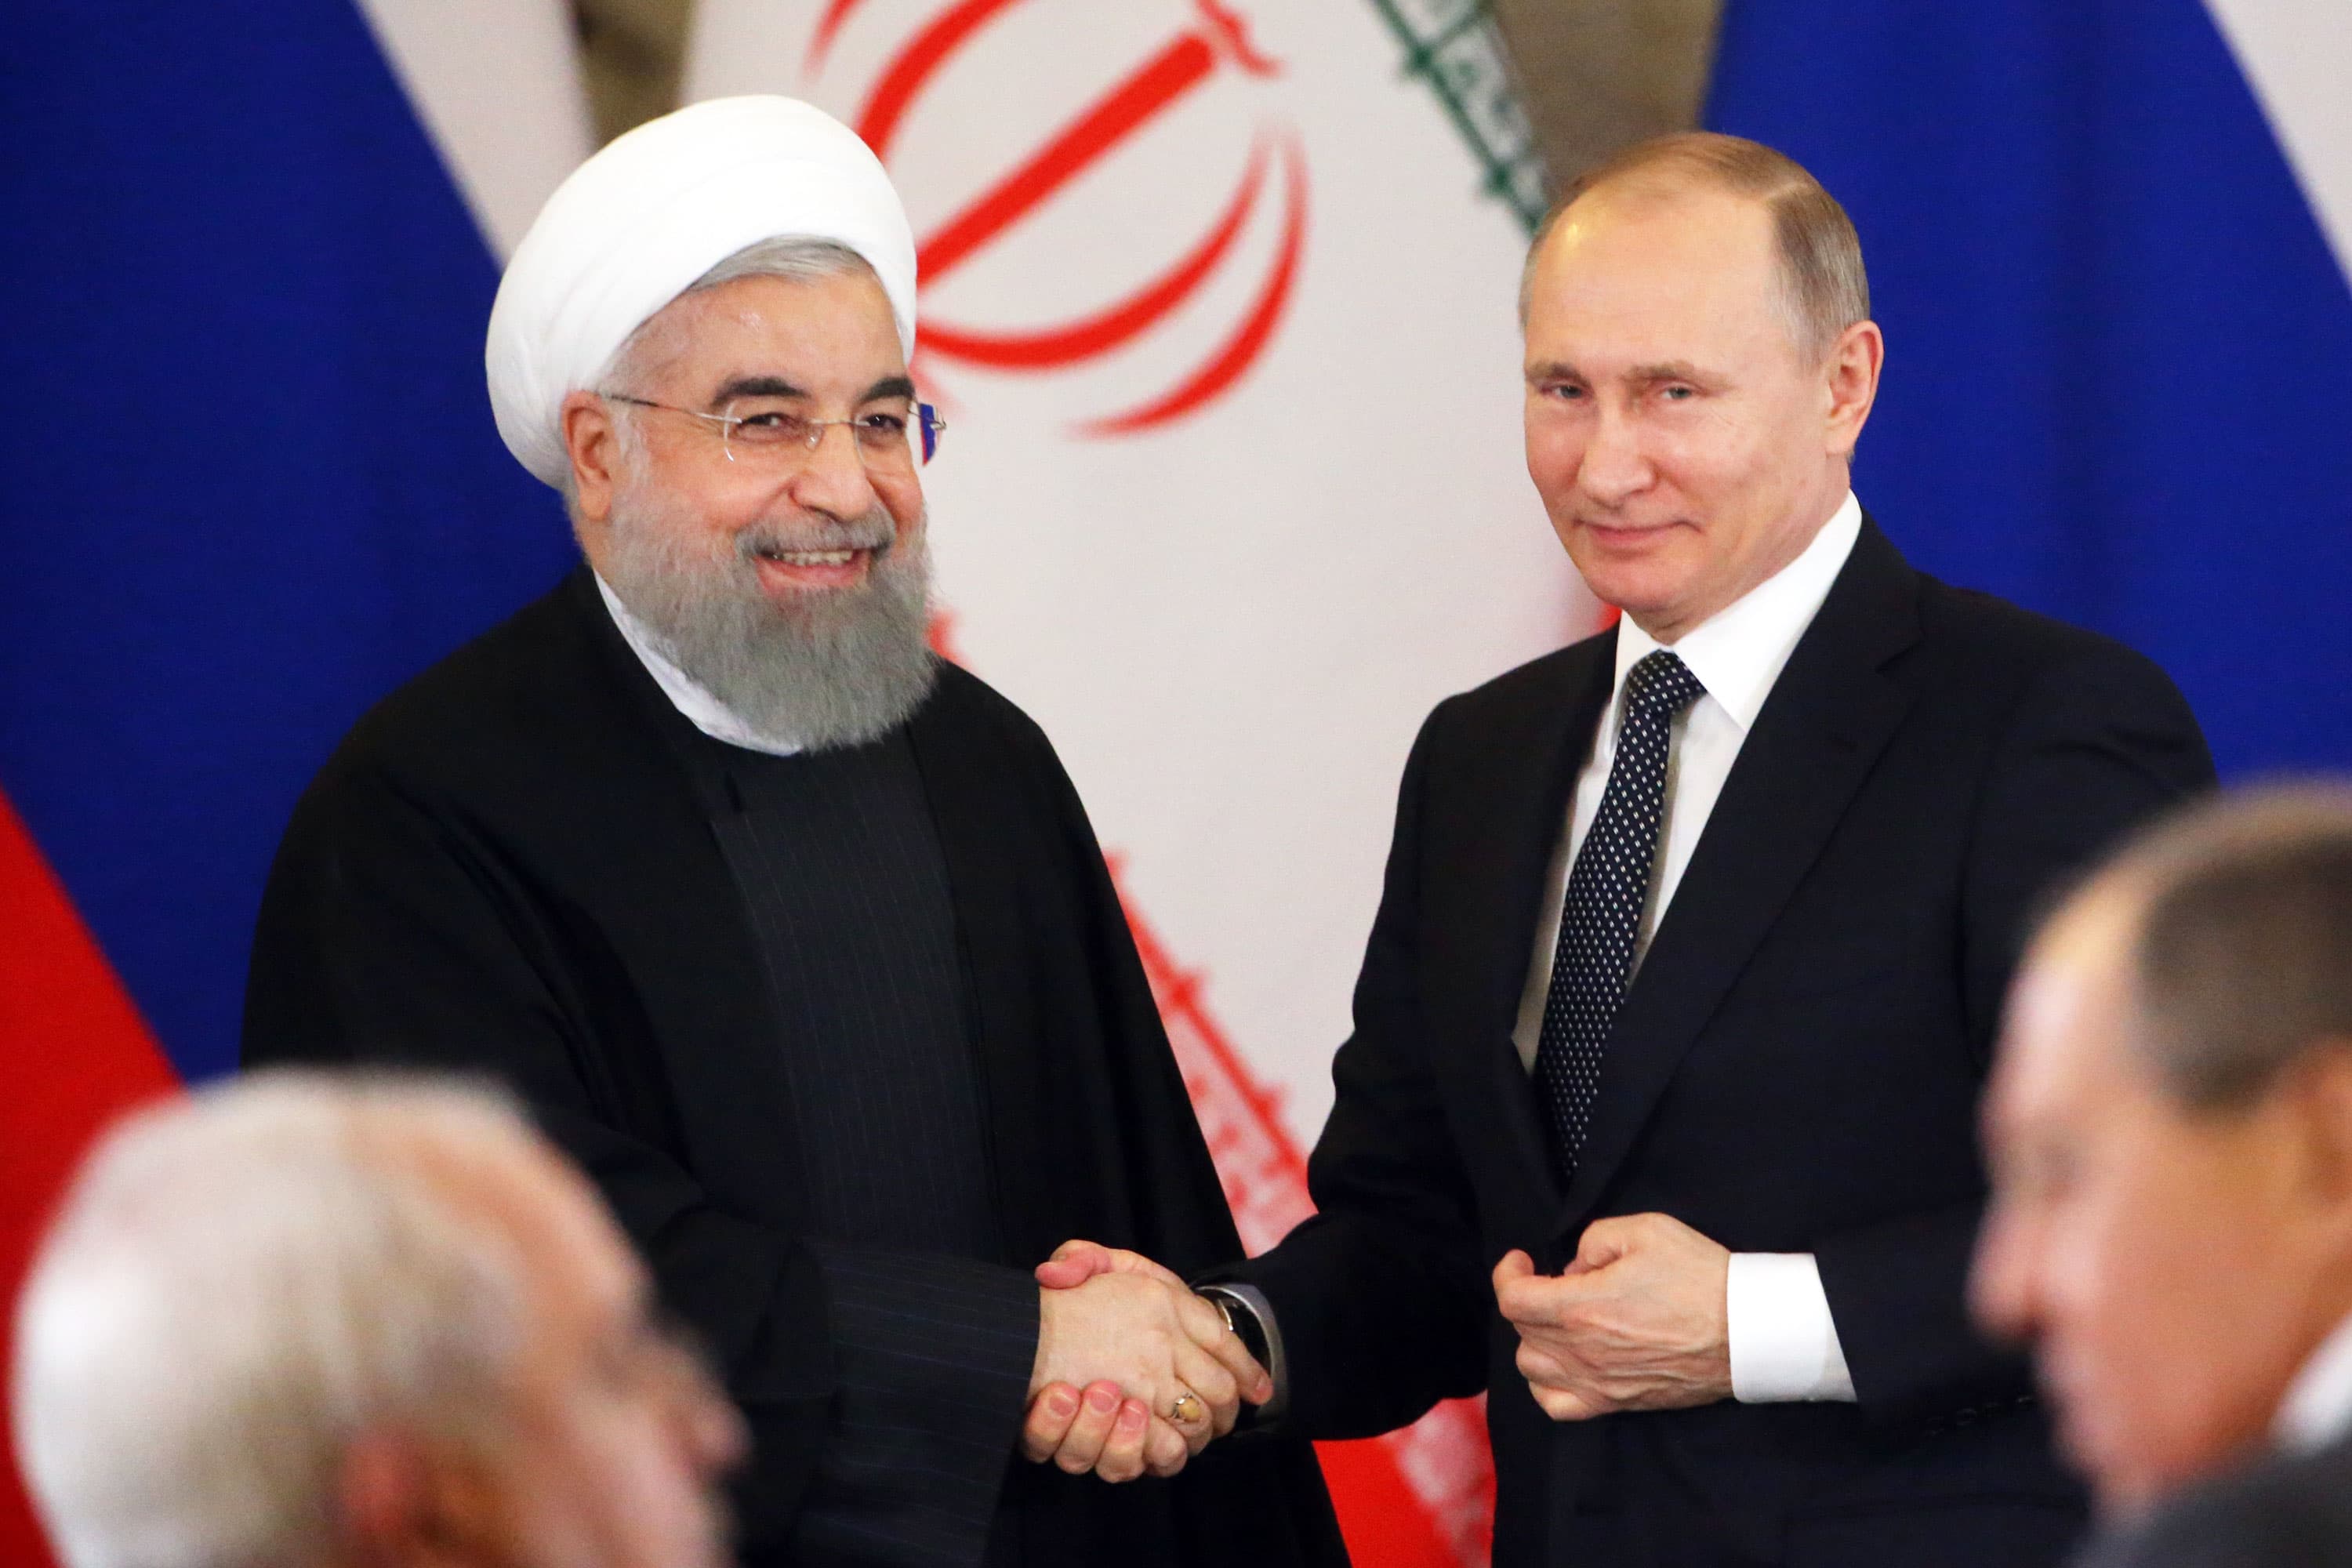 Russia and Iran tried to interfere in the 2020 elections, US intelligence agencies say